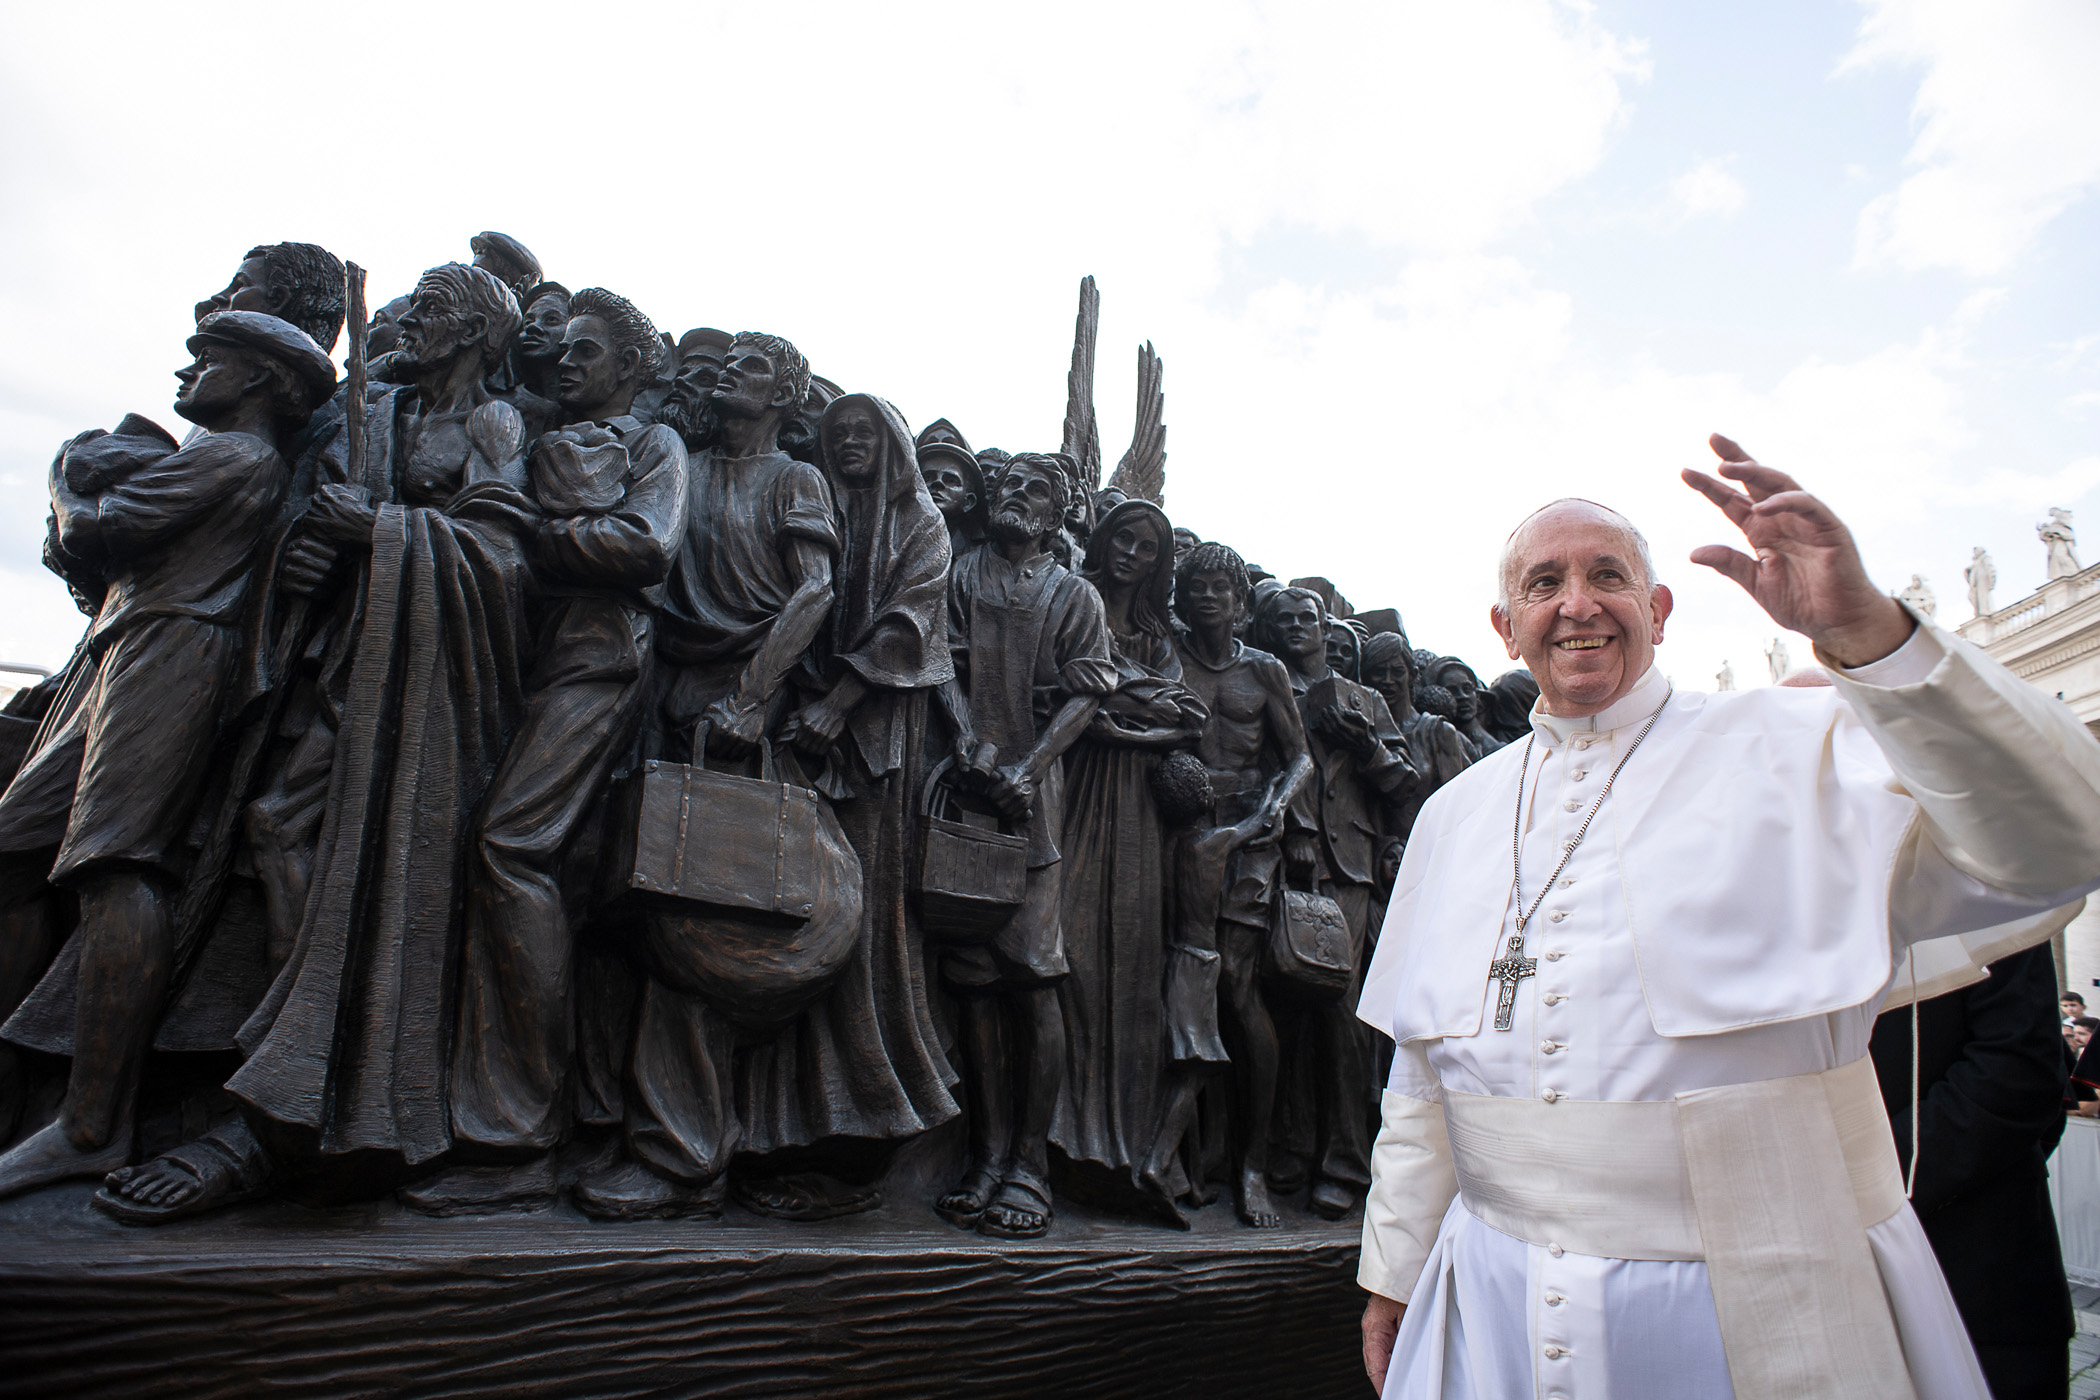 20190930T0558-534-CNS-POPE-MASS-MIGRANTS-REFUGEES